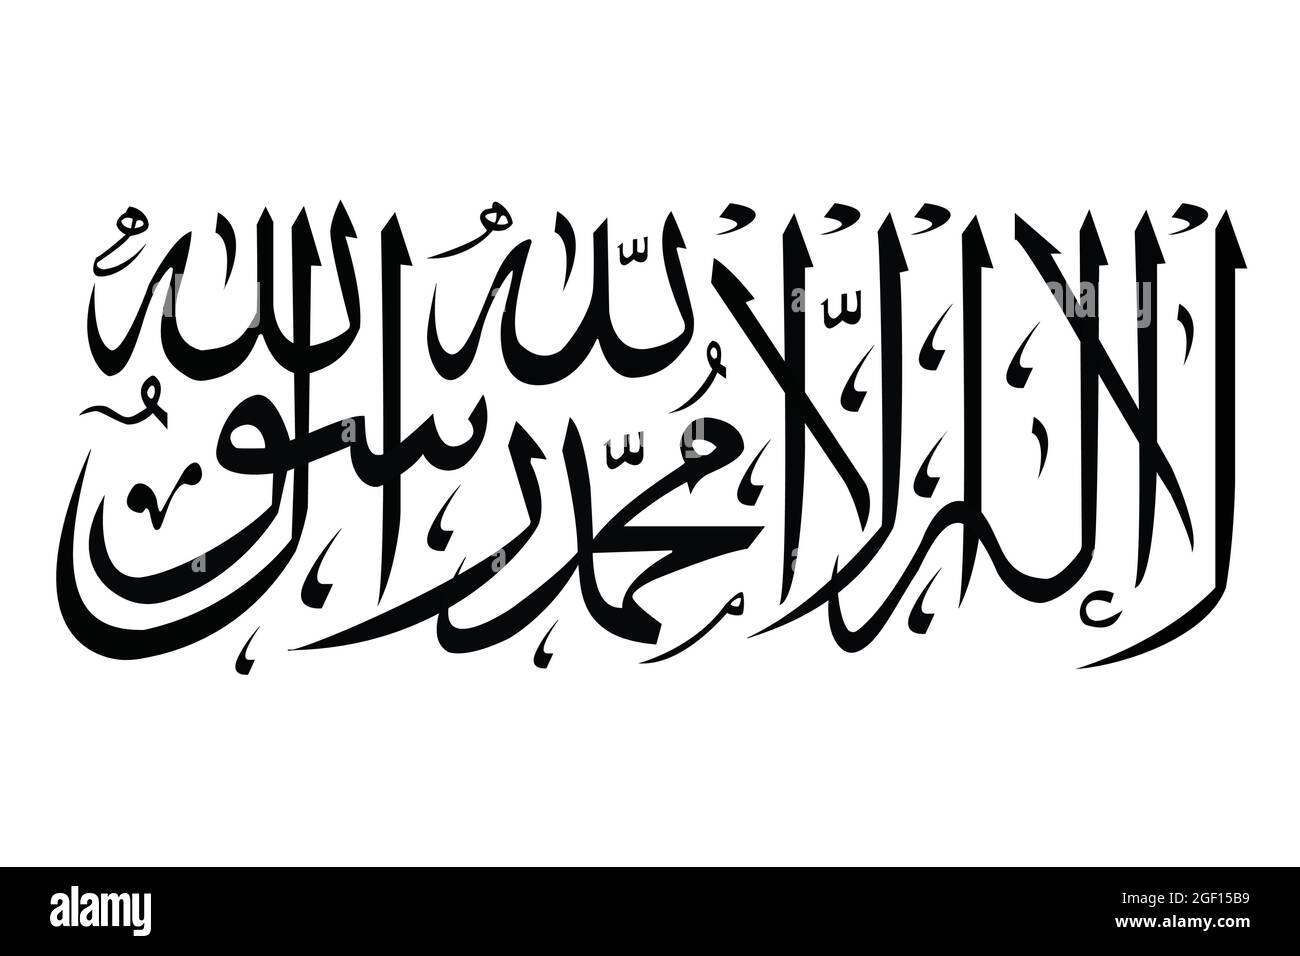 Spectacular representation of the Taliban Inscription on a white background. Stock Vector